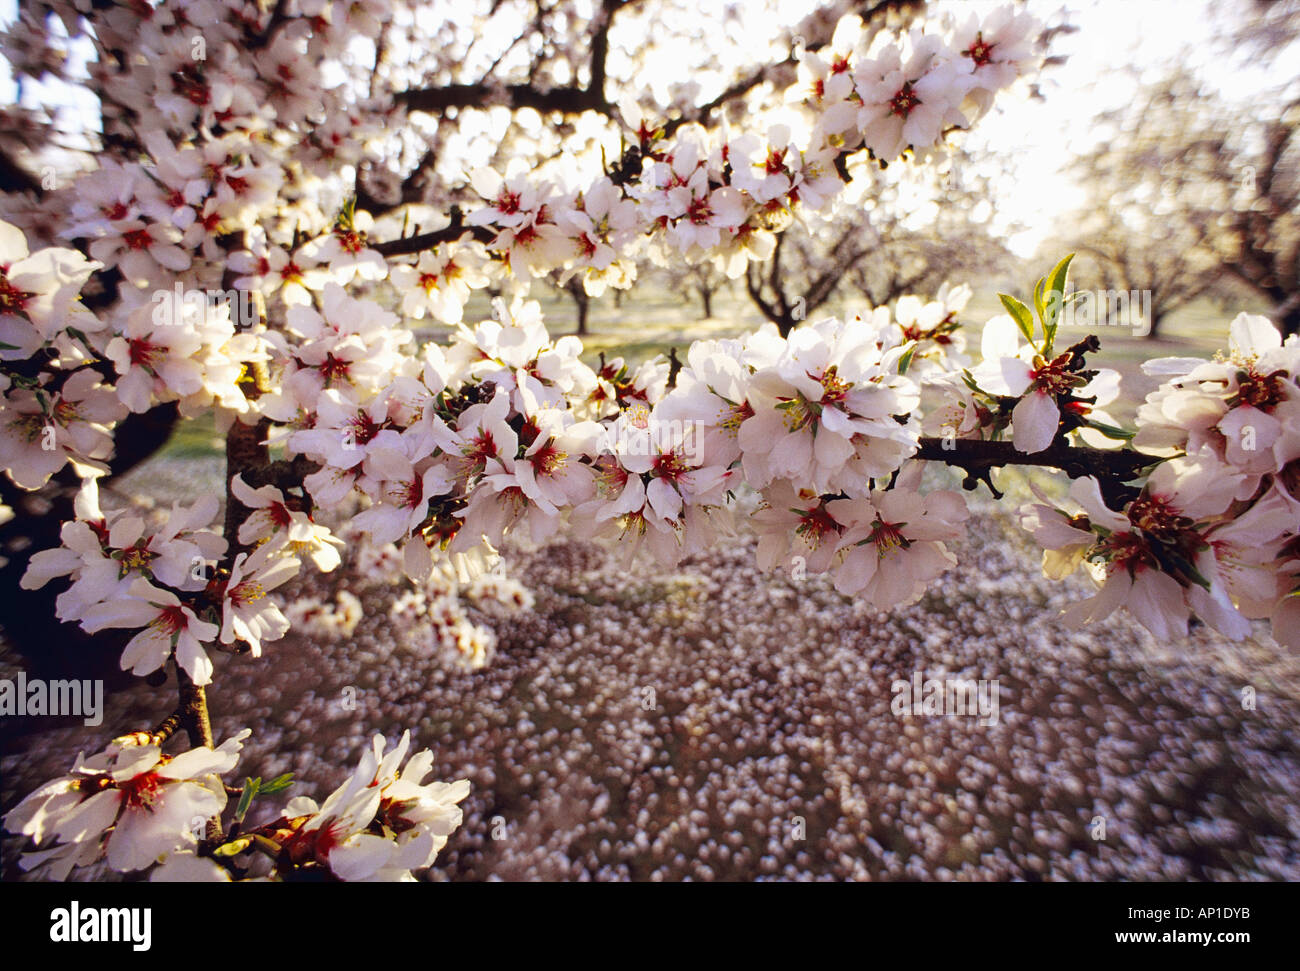 Agriculture - Almond blossoms in full Spring blossom stage / near Modesto, California, USA. Stock Photo